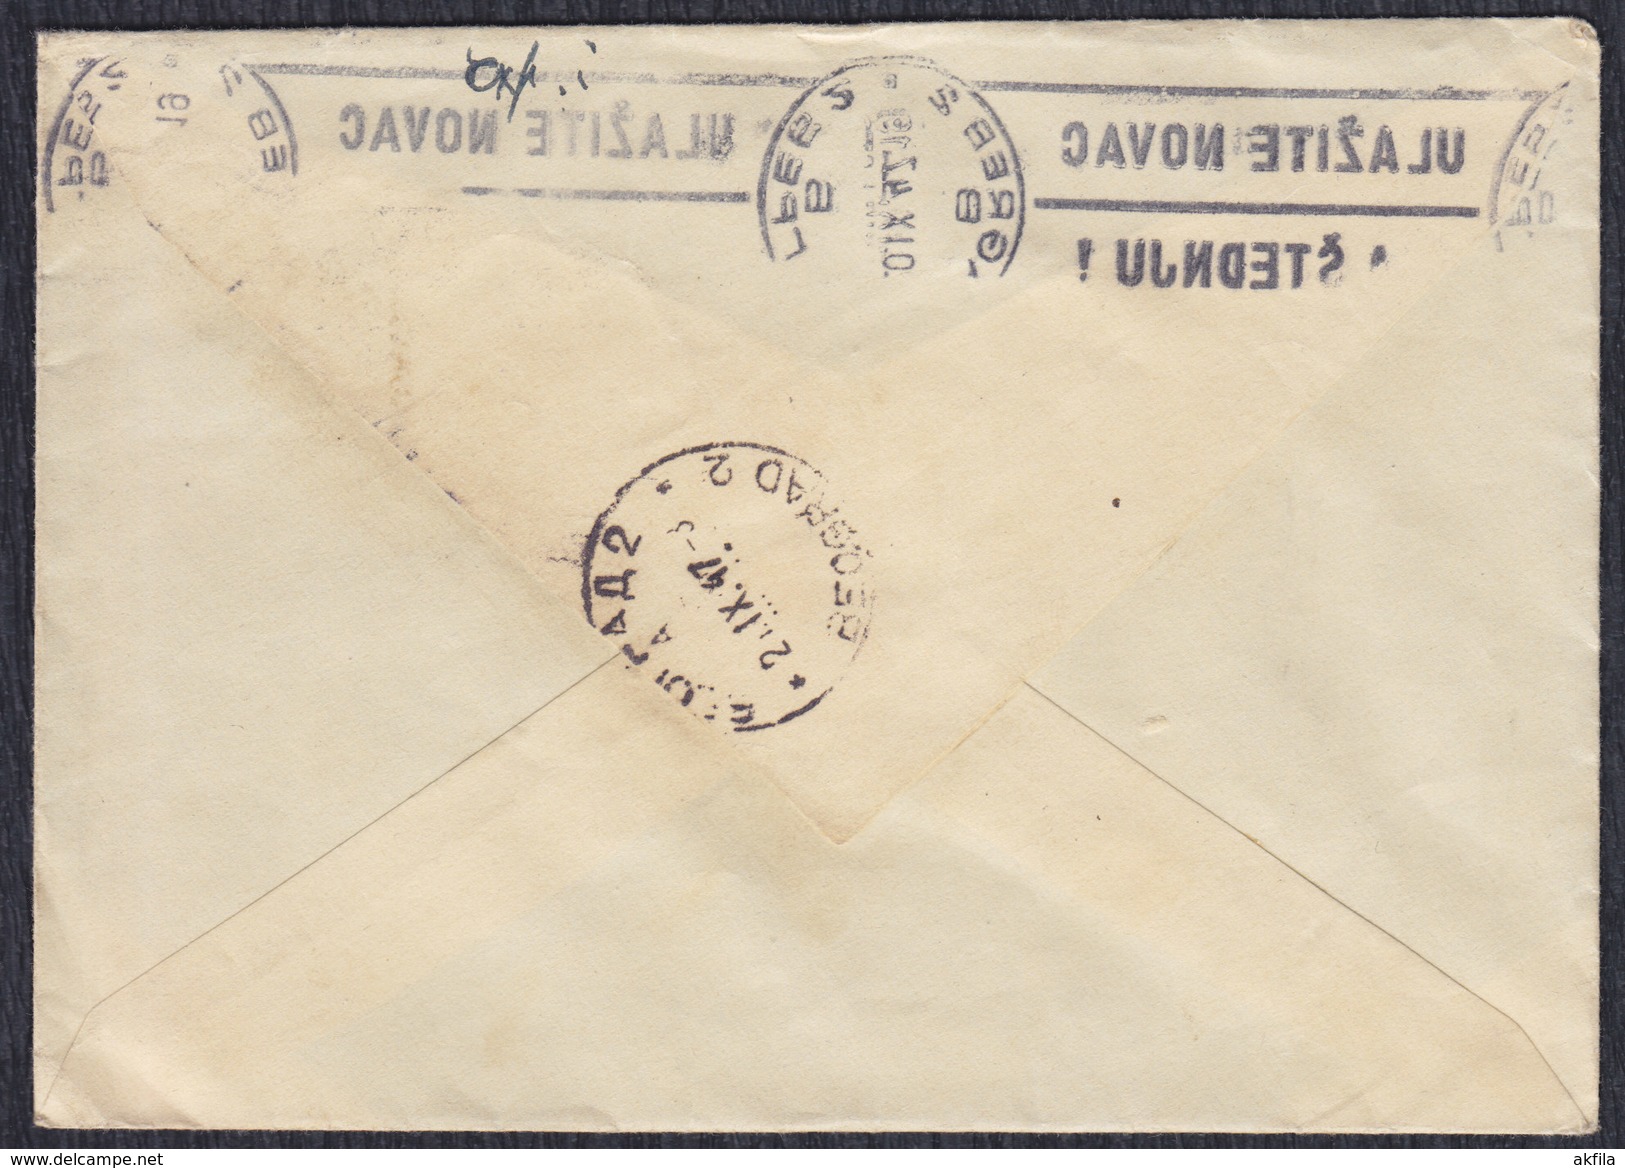 Yugoslavia Slovenia 1947 Julian March, Letter Sent From Zagreb To Beograd - Covers & Documents